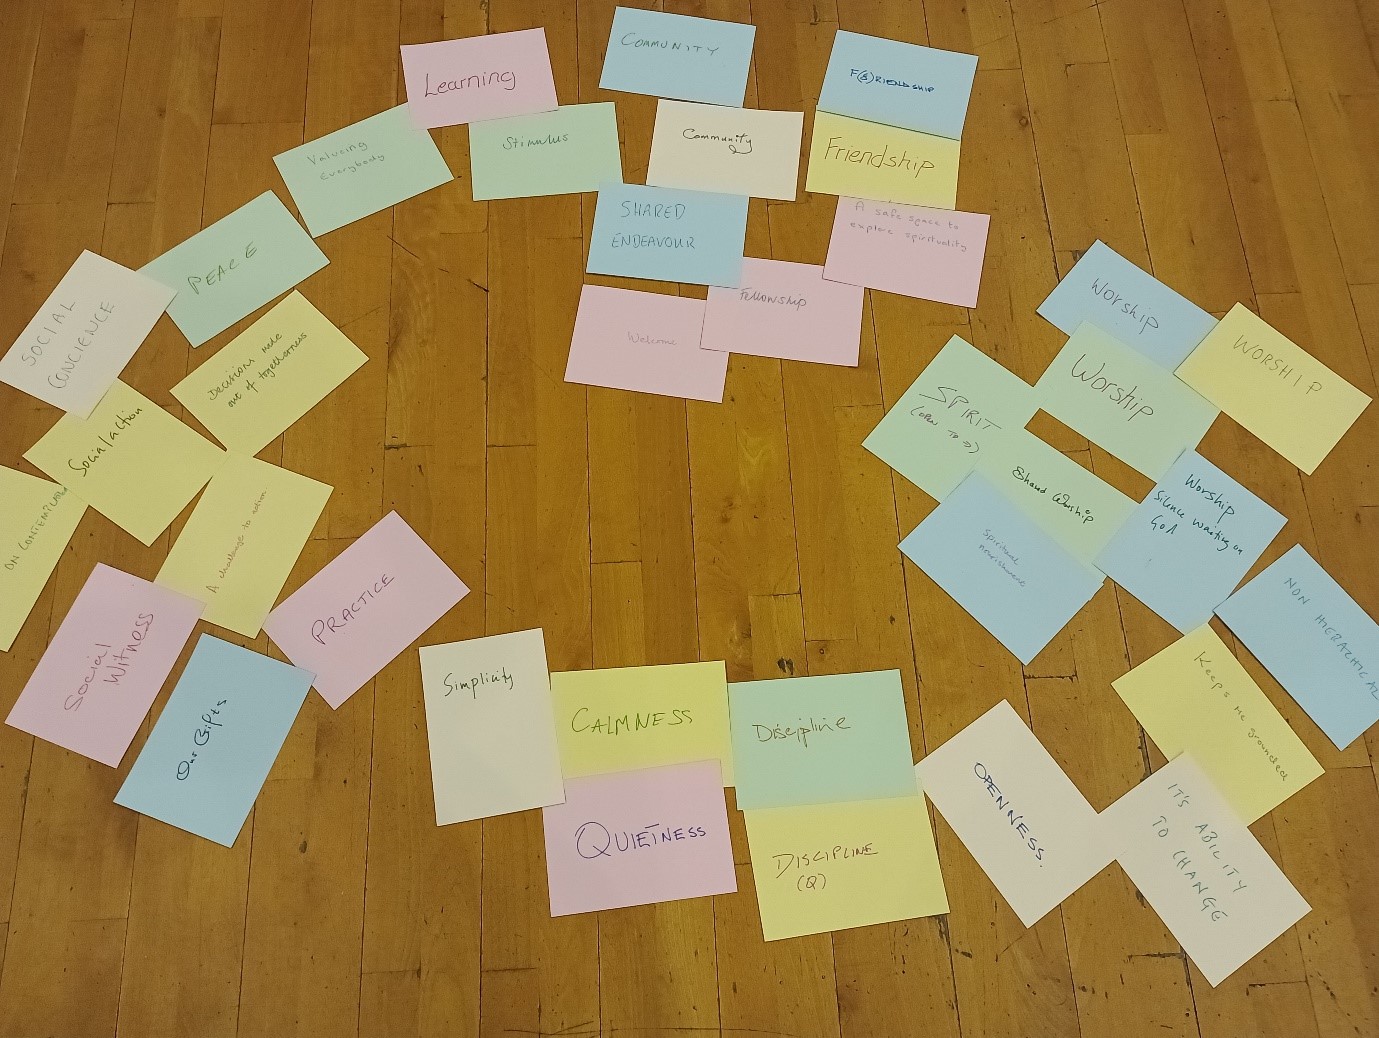 handwritten words on coloured card on a wooden floor, some words include friendship, learning and community